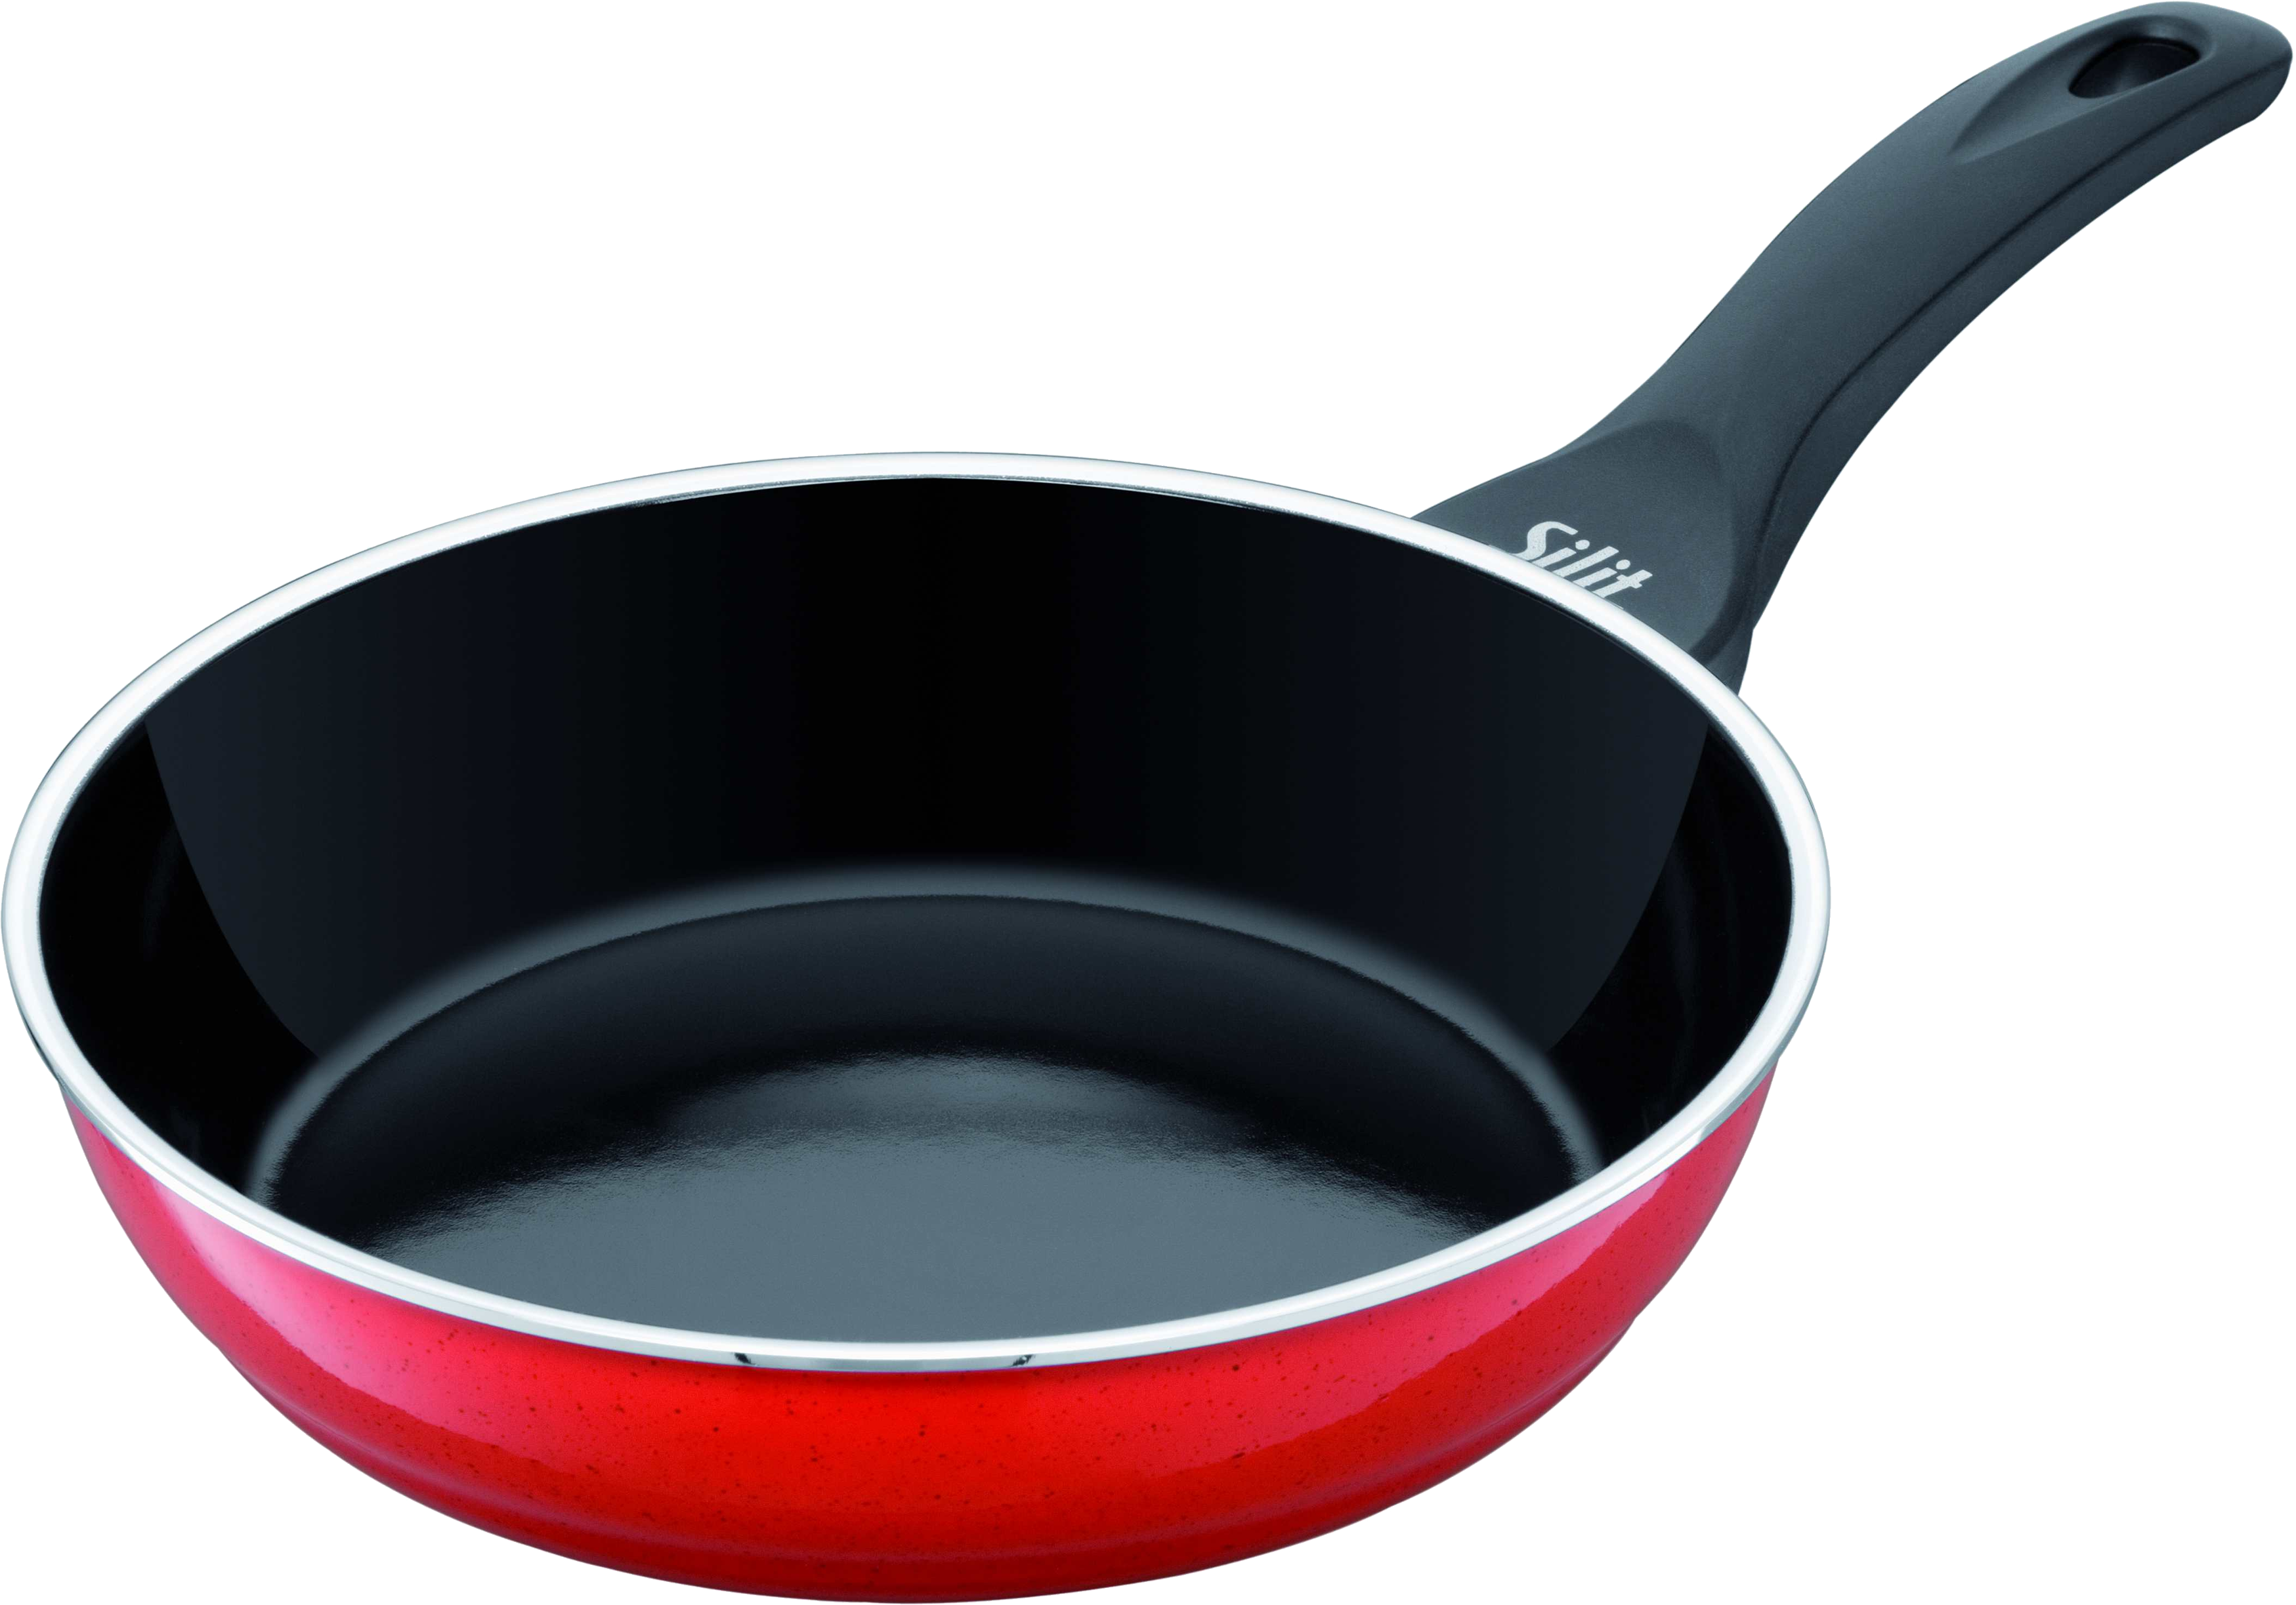 Red Frying Pan PNG HD Images